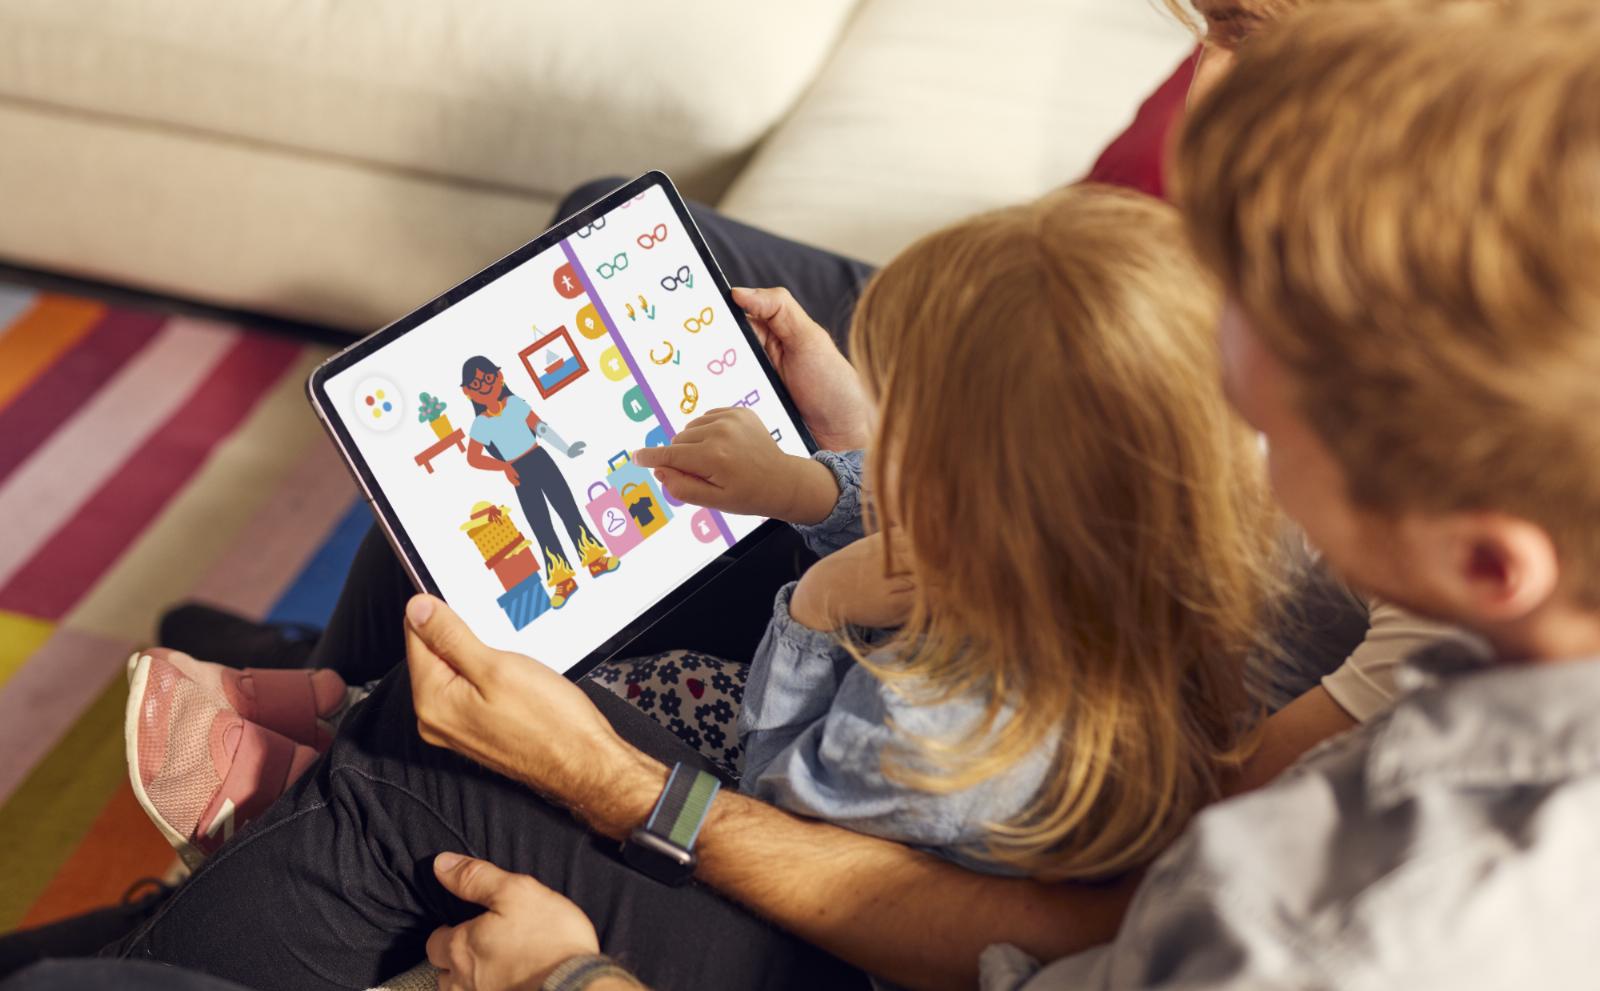 Now a Series A startup, kids’ app and ‘digital toy’ Pok Pok is coming to Android